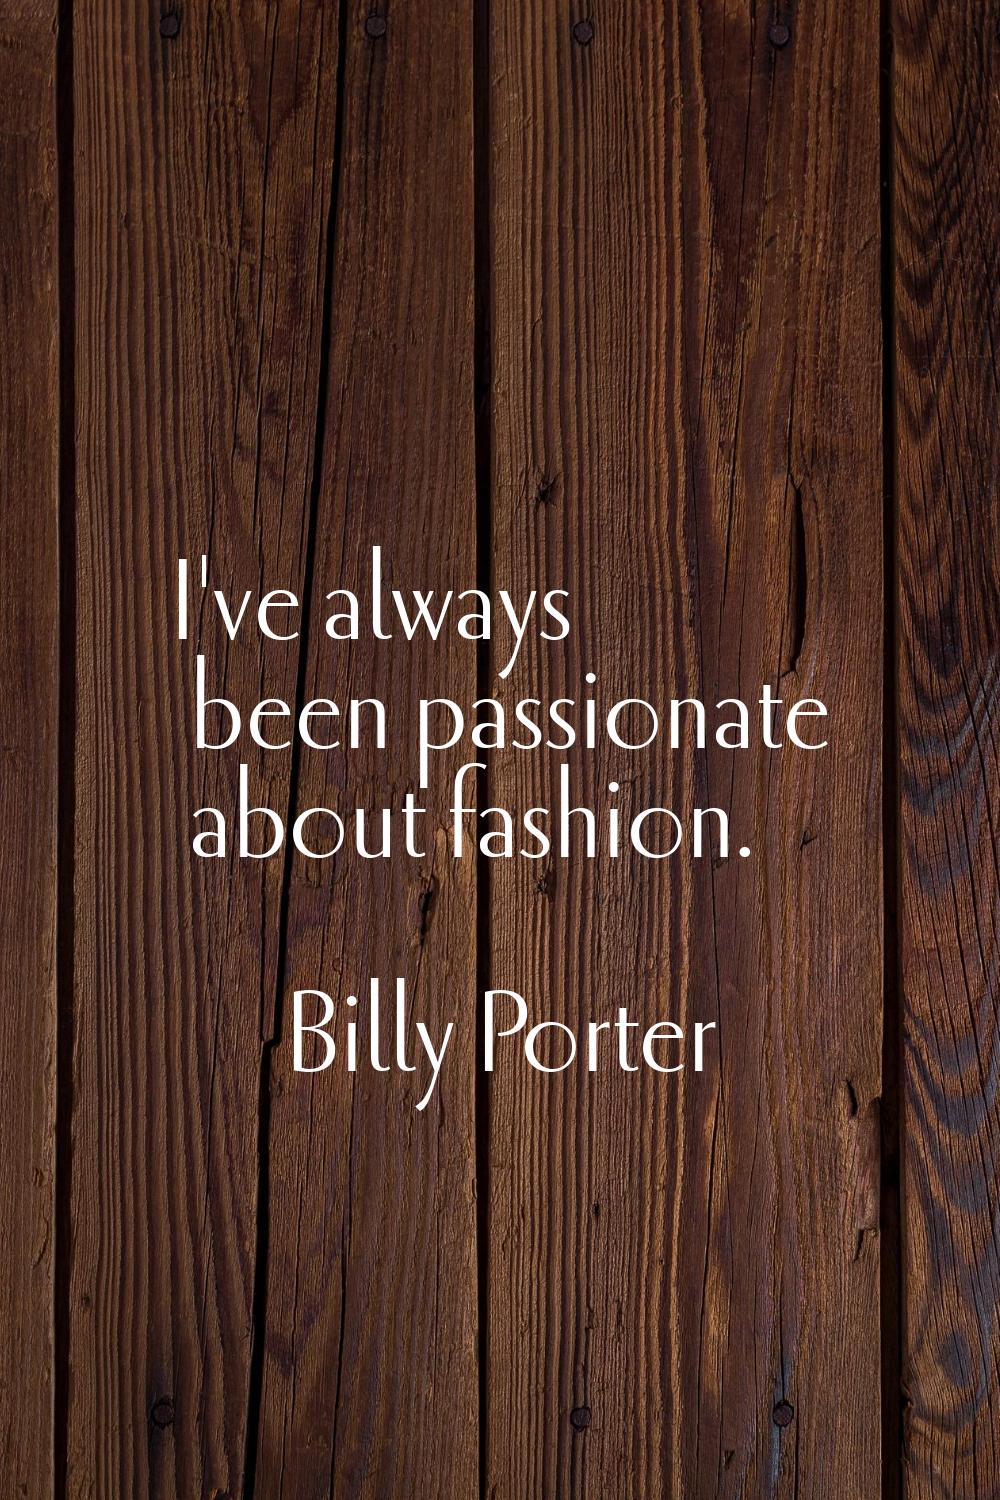 I've always been passionate about fashion.